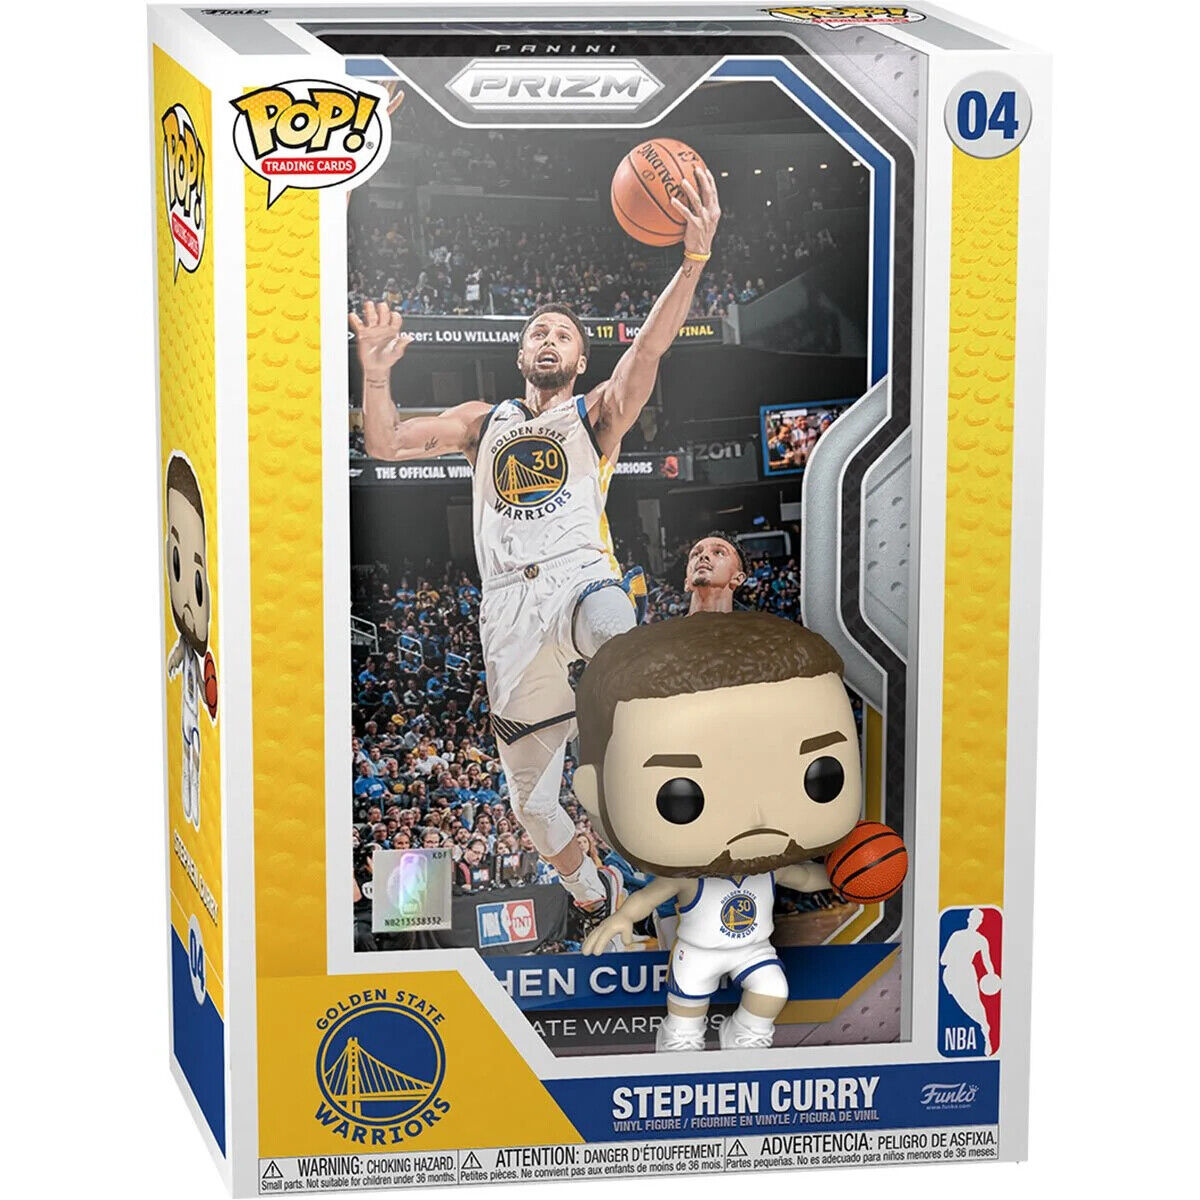 Funko Pop Stephen Curry Trading Cards Golden State Warriors NBA Pop IN STOCK 04